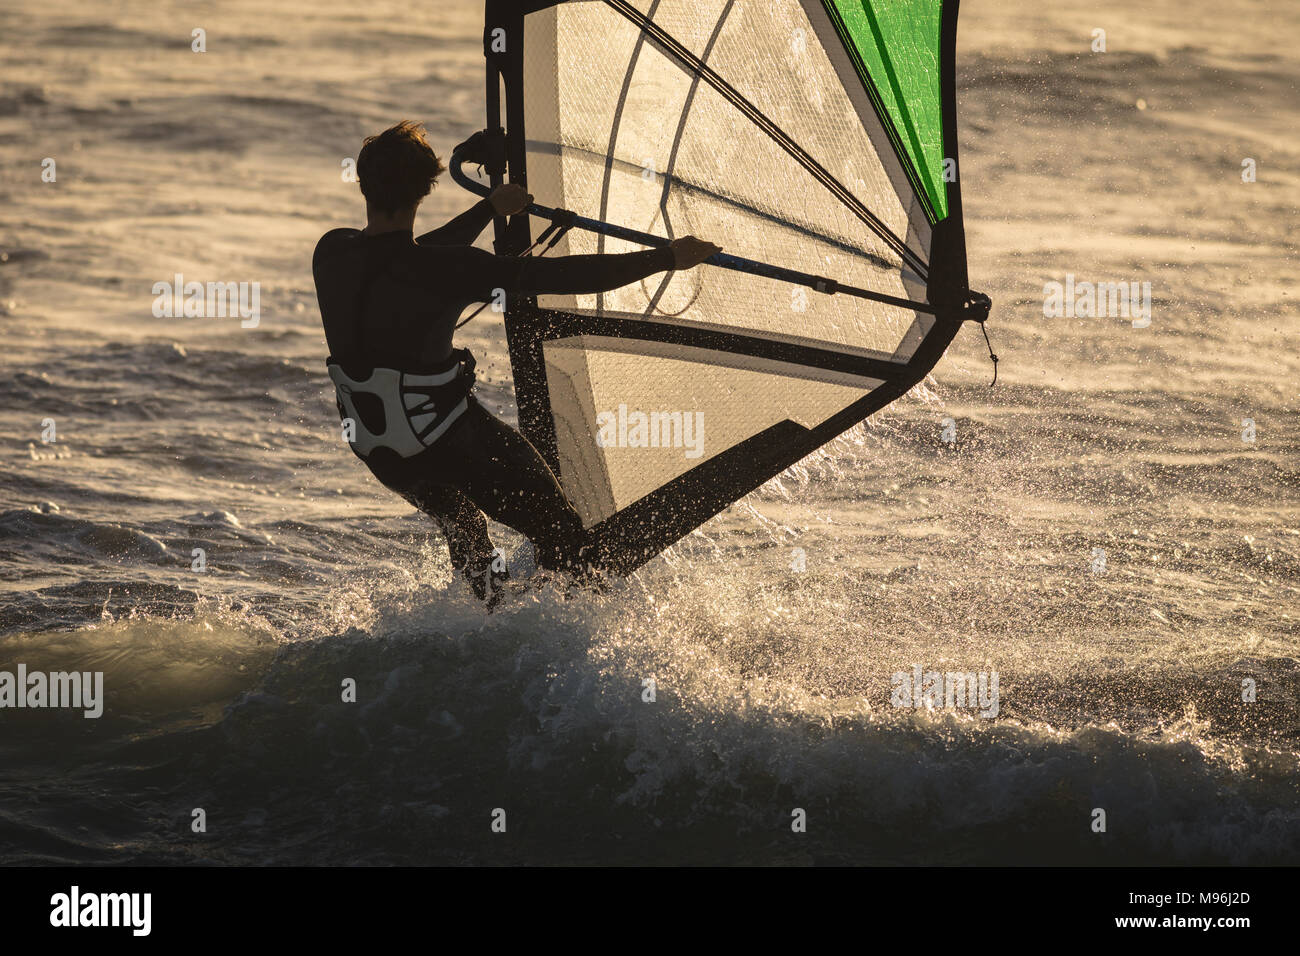 Male surfer surfing with surfboard and kite Stock Photo